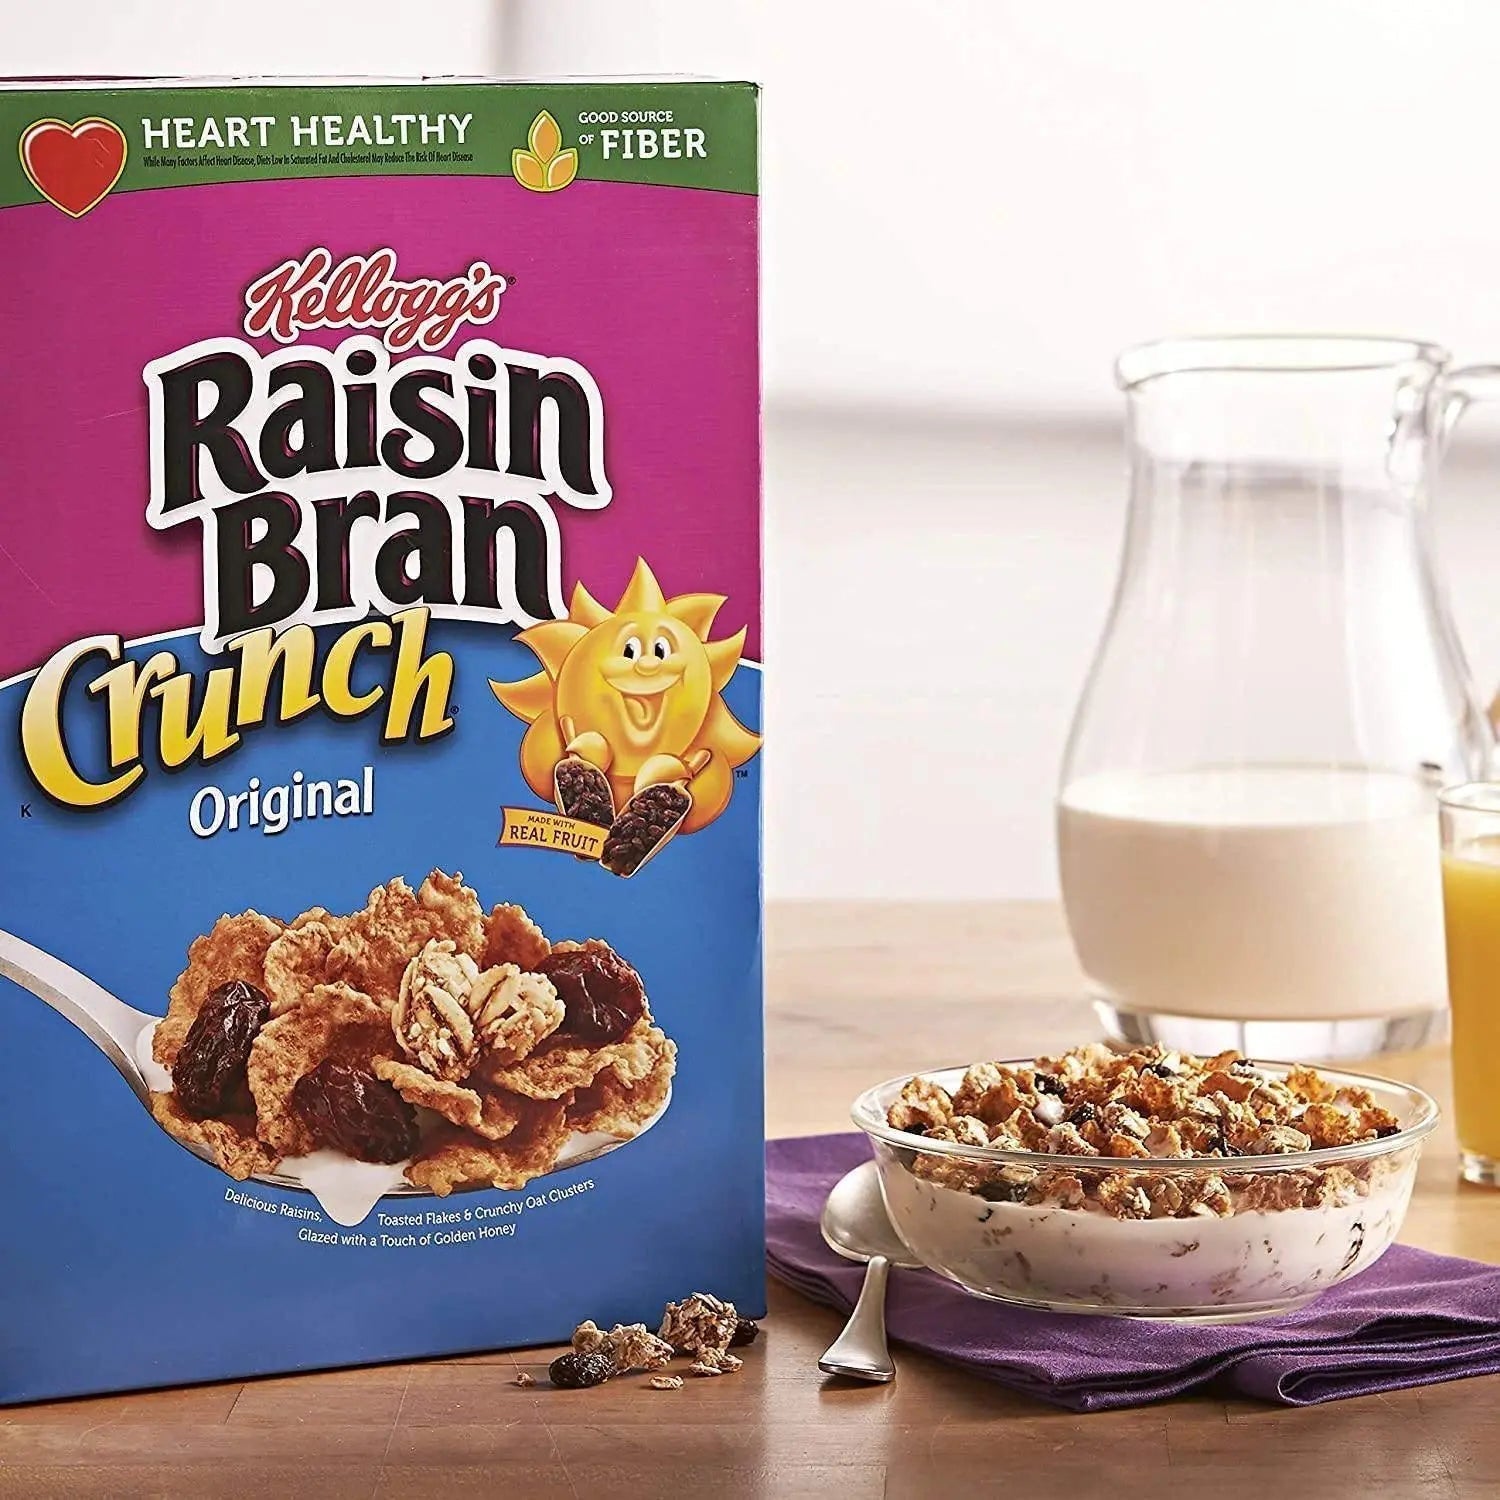 Wholesale prices with free shipping all over United States Kellogg's Original Raisin Bran Crunch Breakfast Cereal - Steven Deals